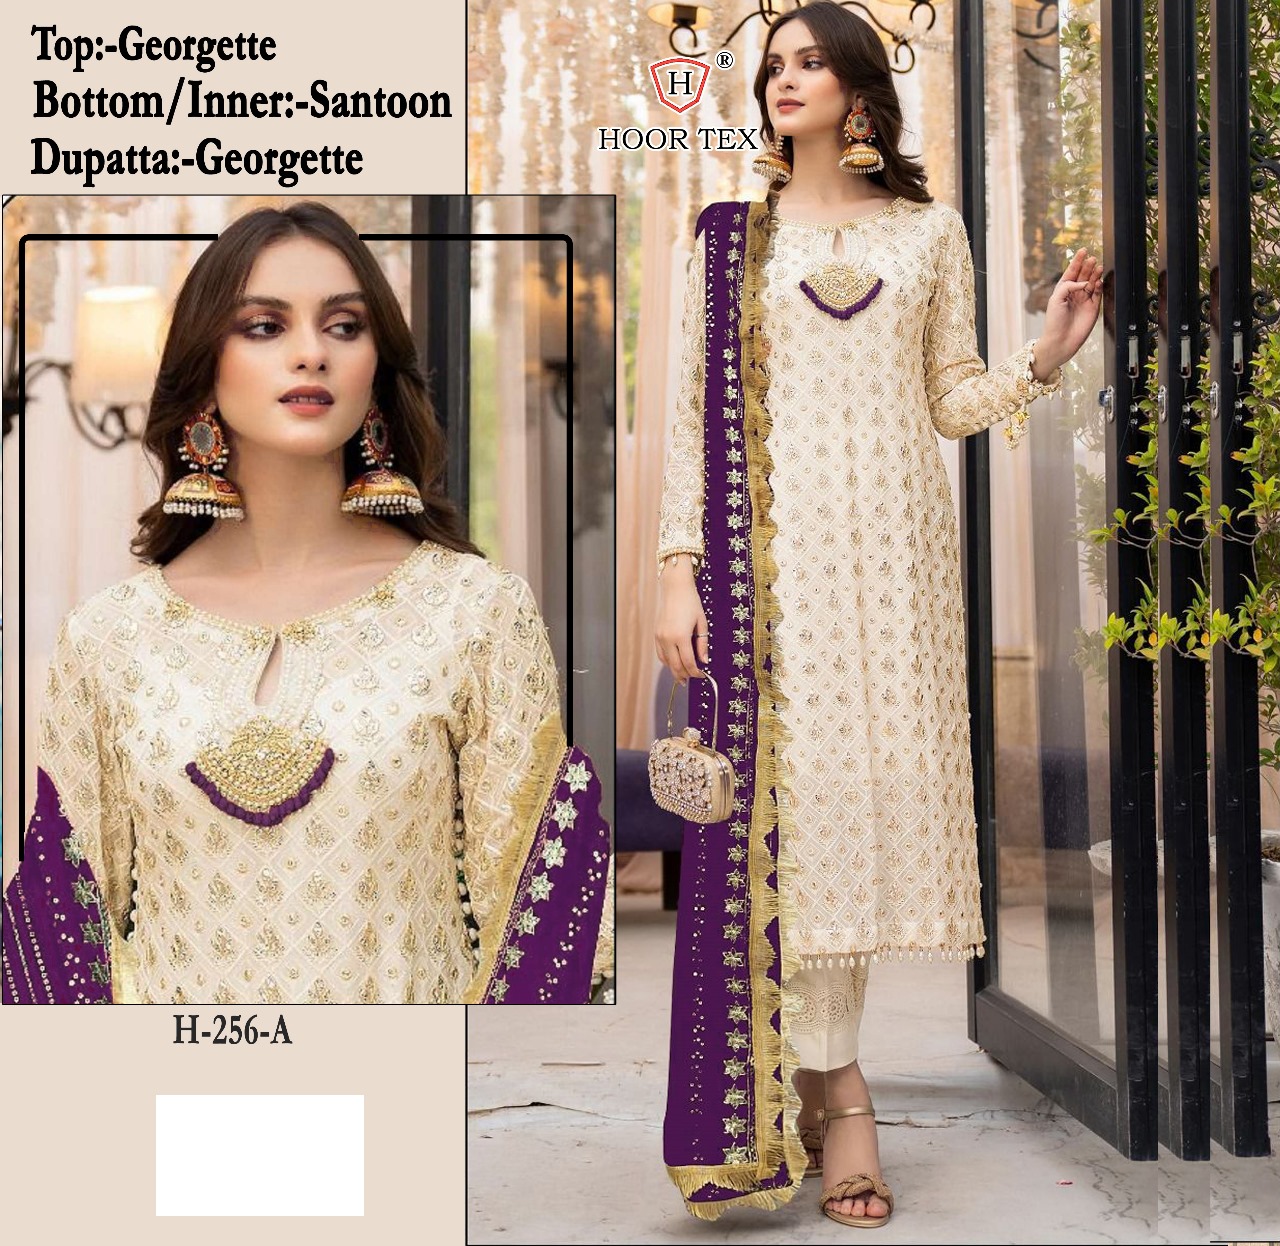 HOOR TEX H 256 A PAKISTANI SUITS IN INDIA